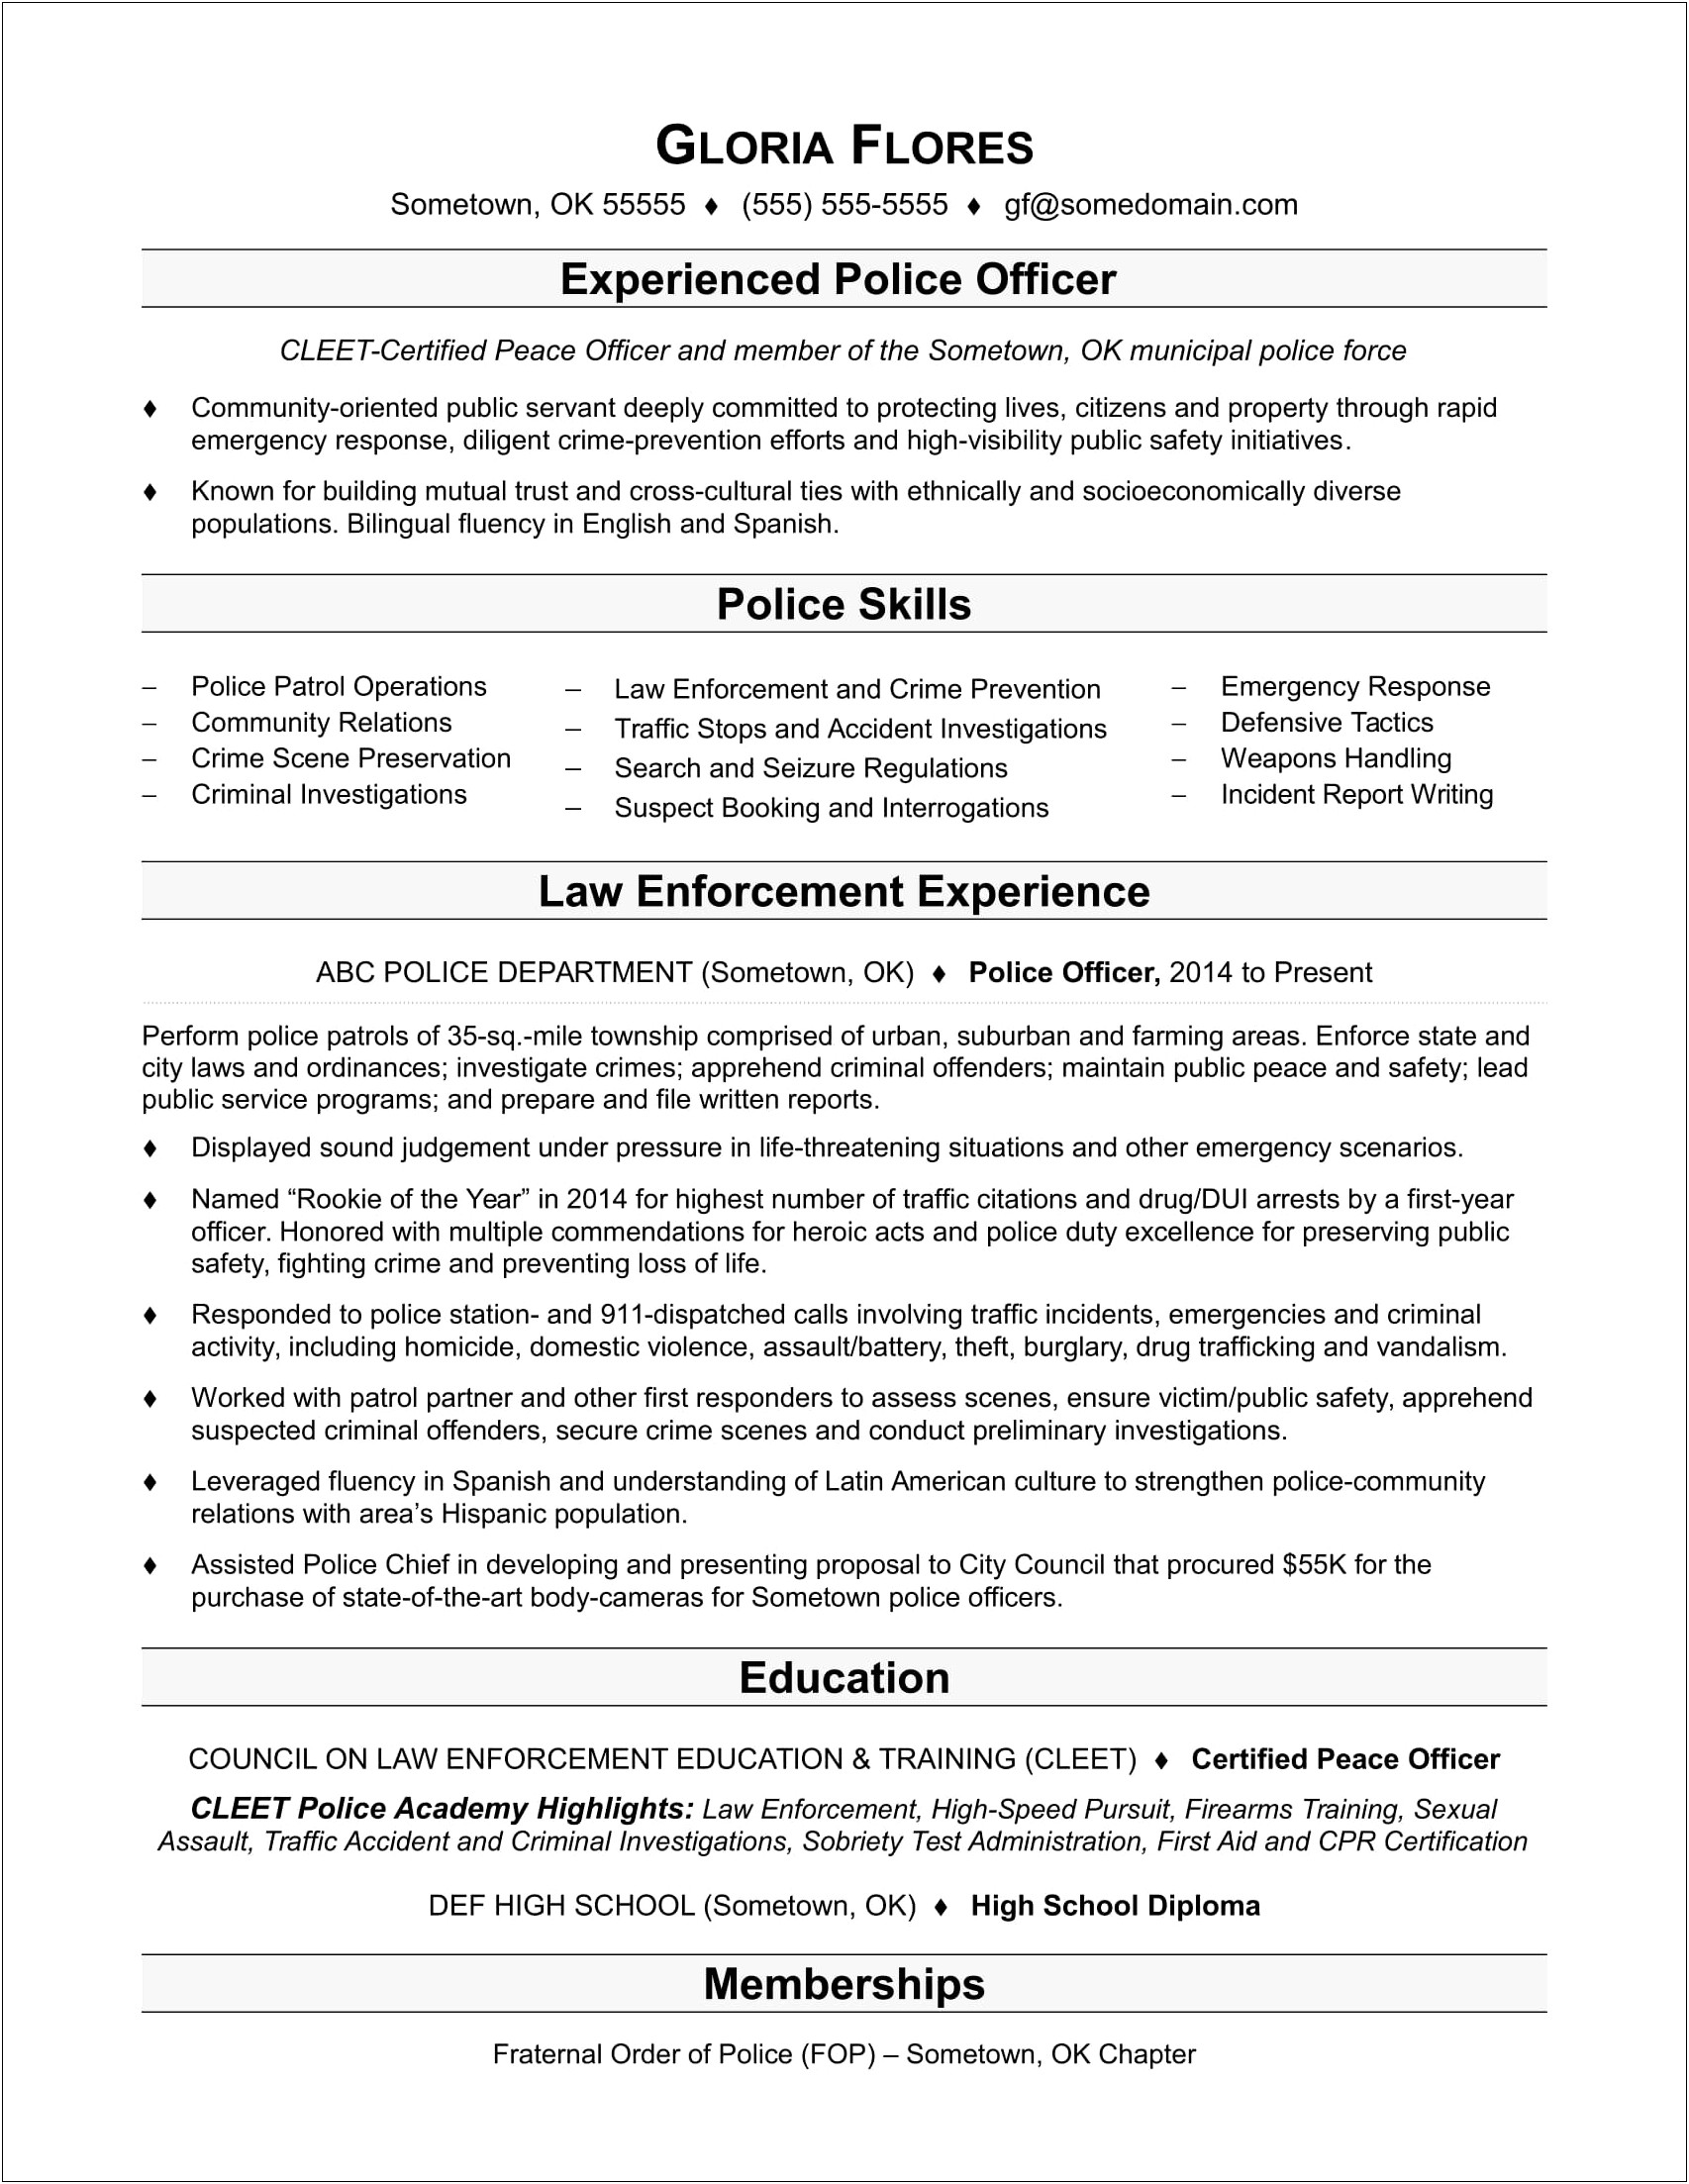 Skills And Abilities Resume For Law Enforcement Promotion